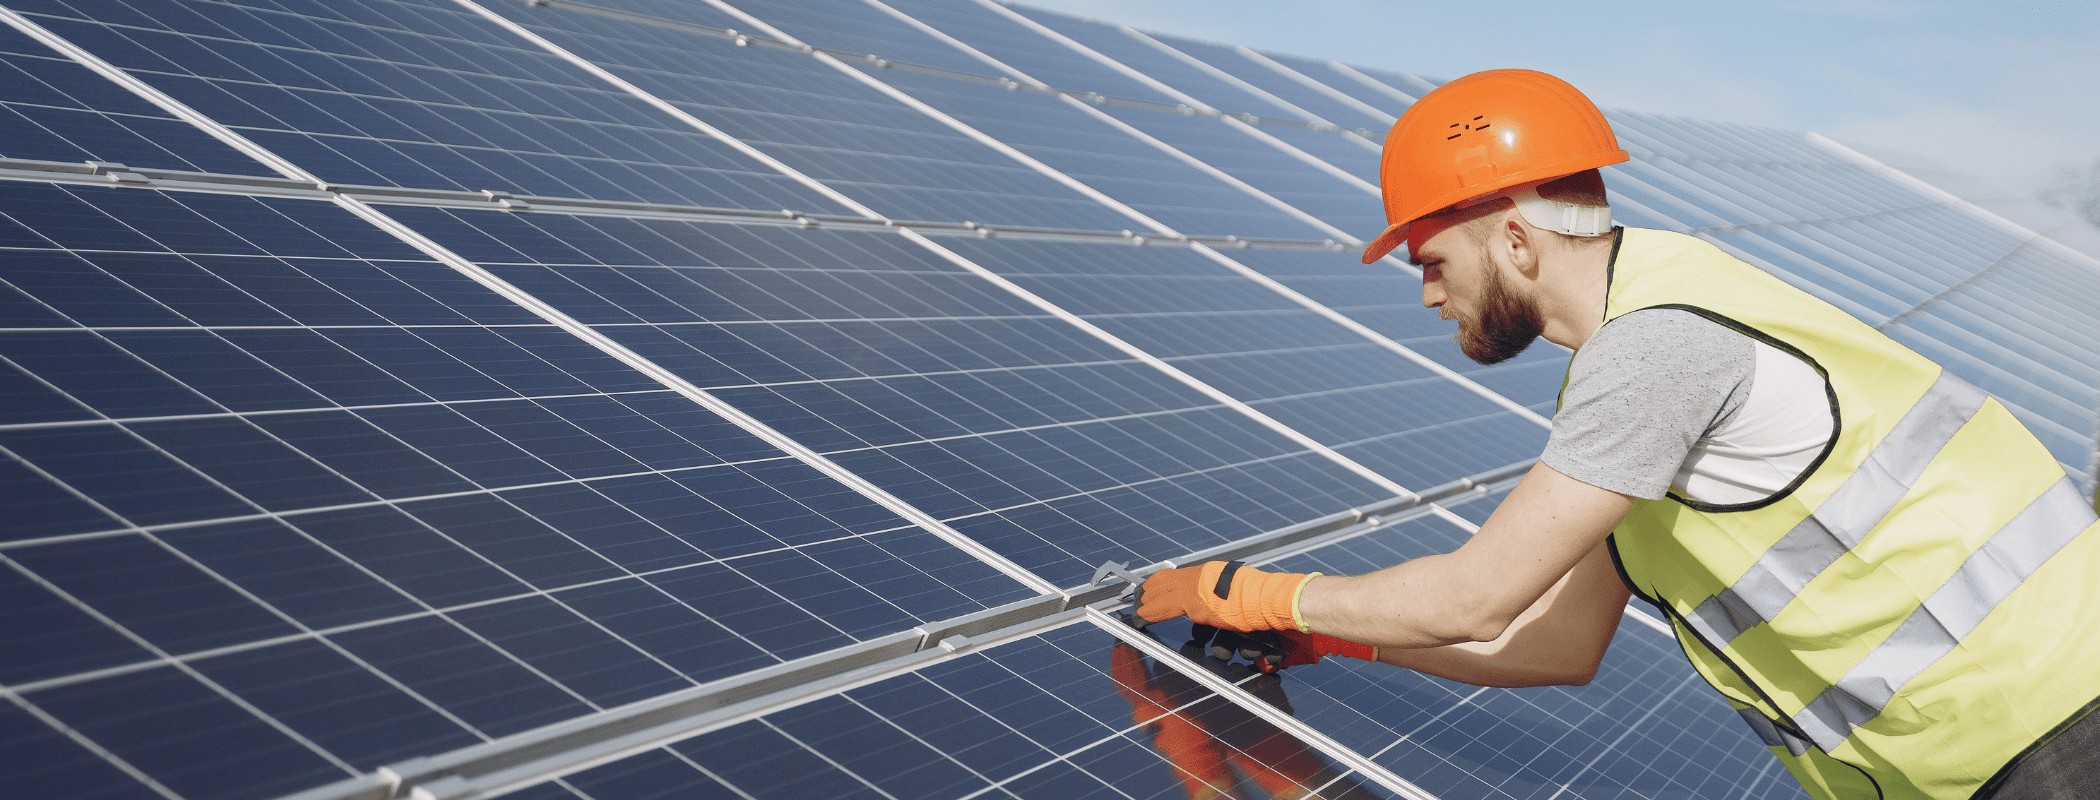 Worker installing solar panel on rooftop